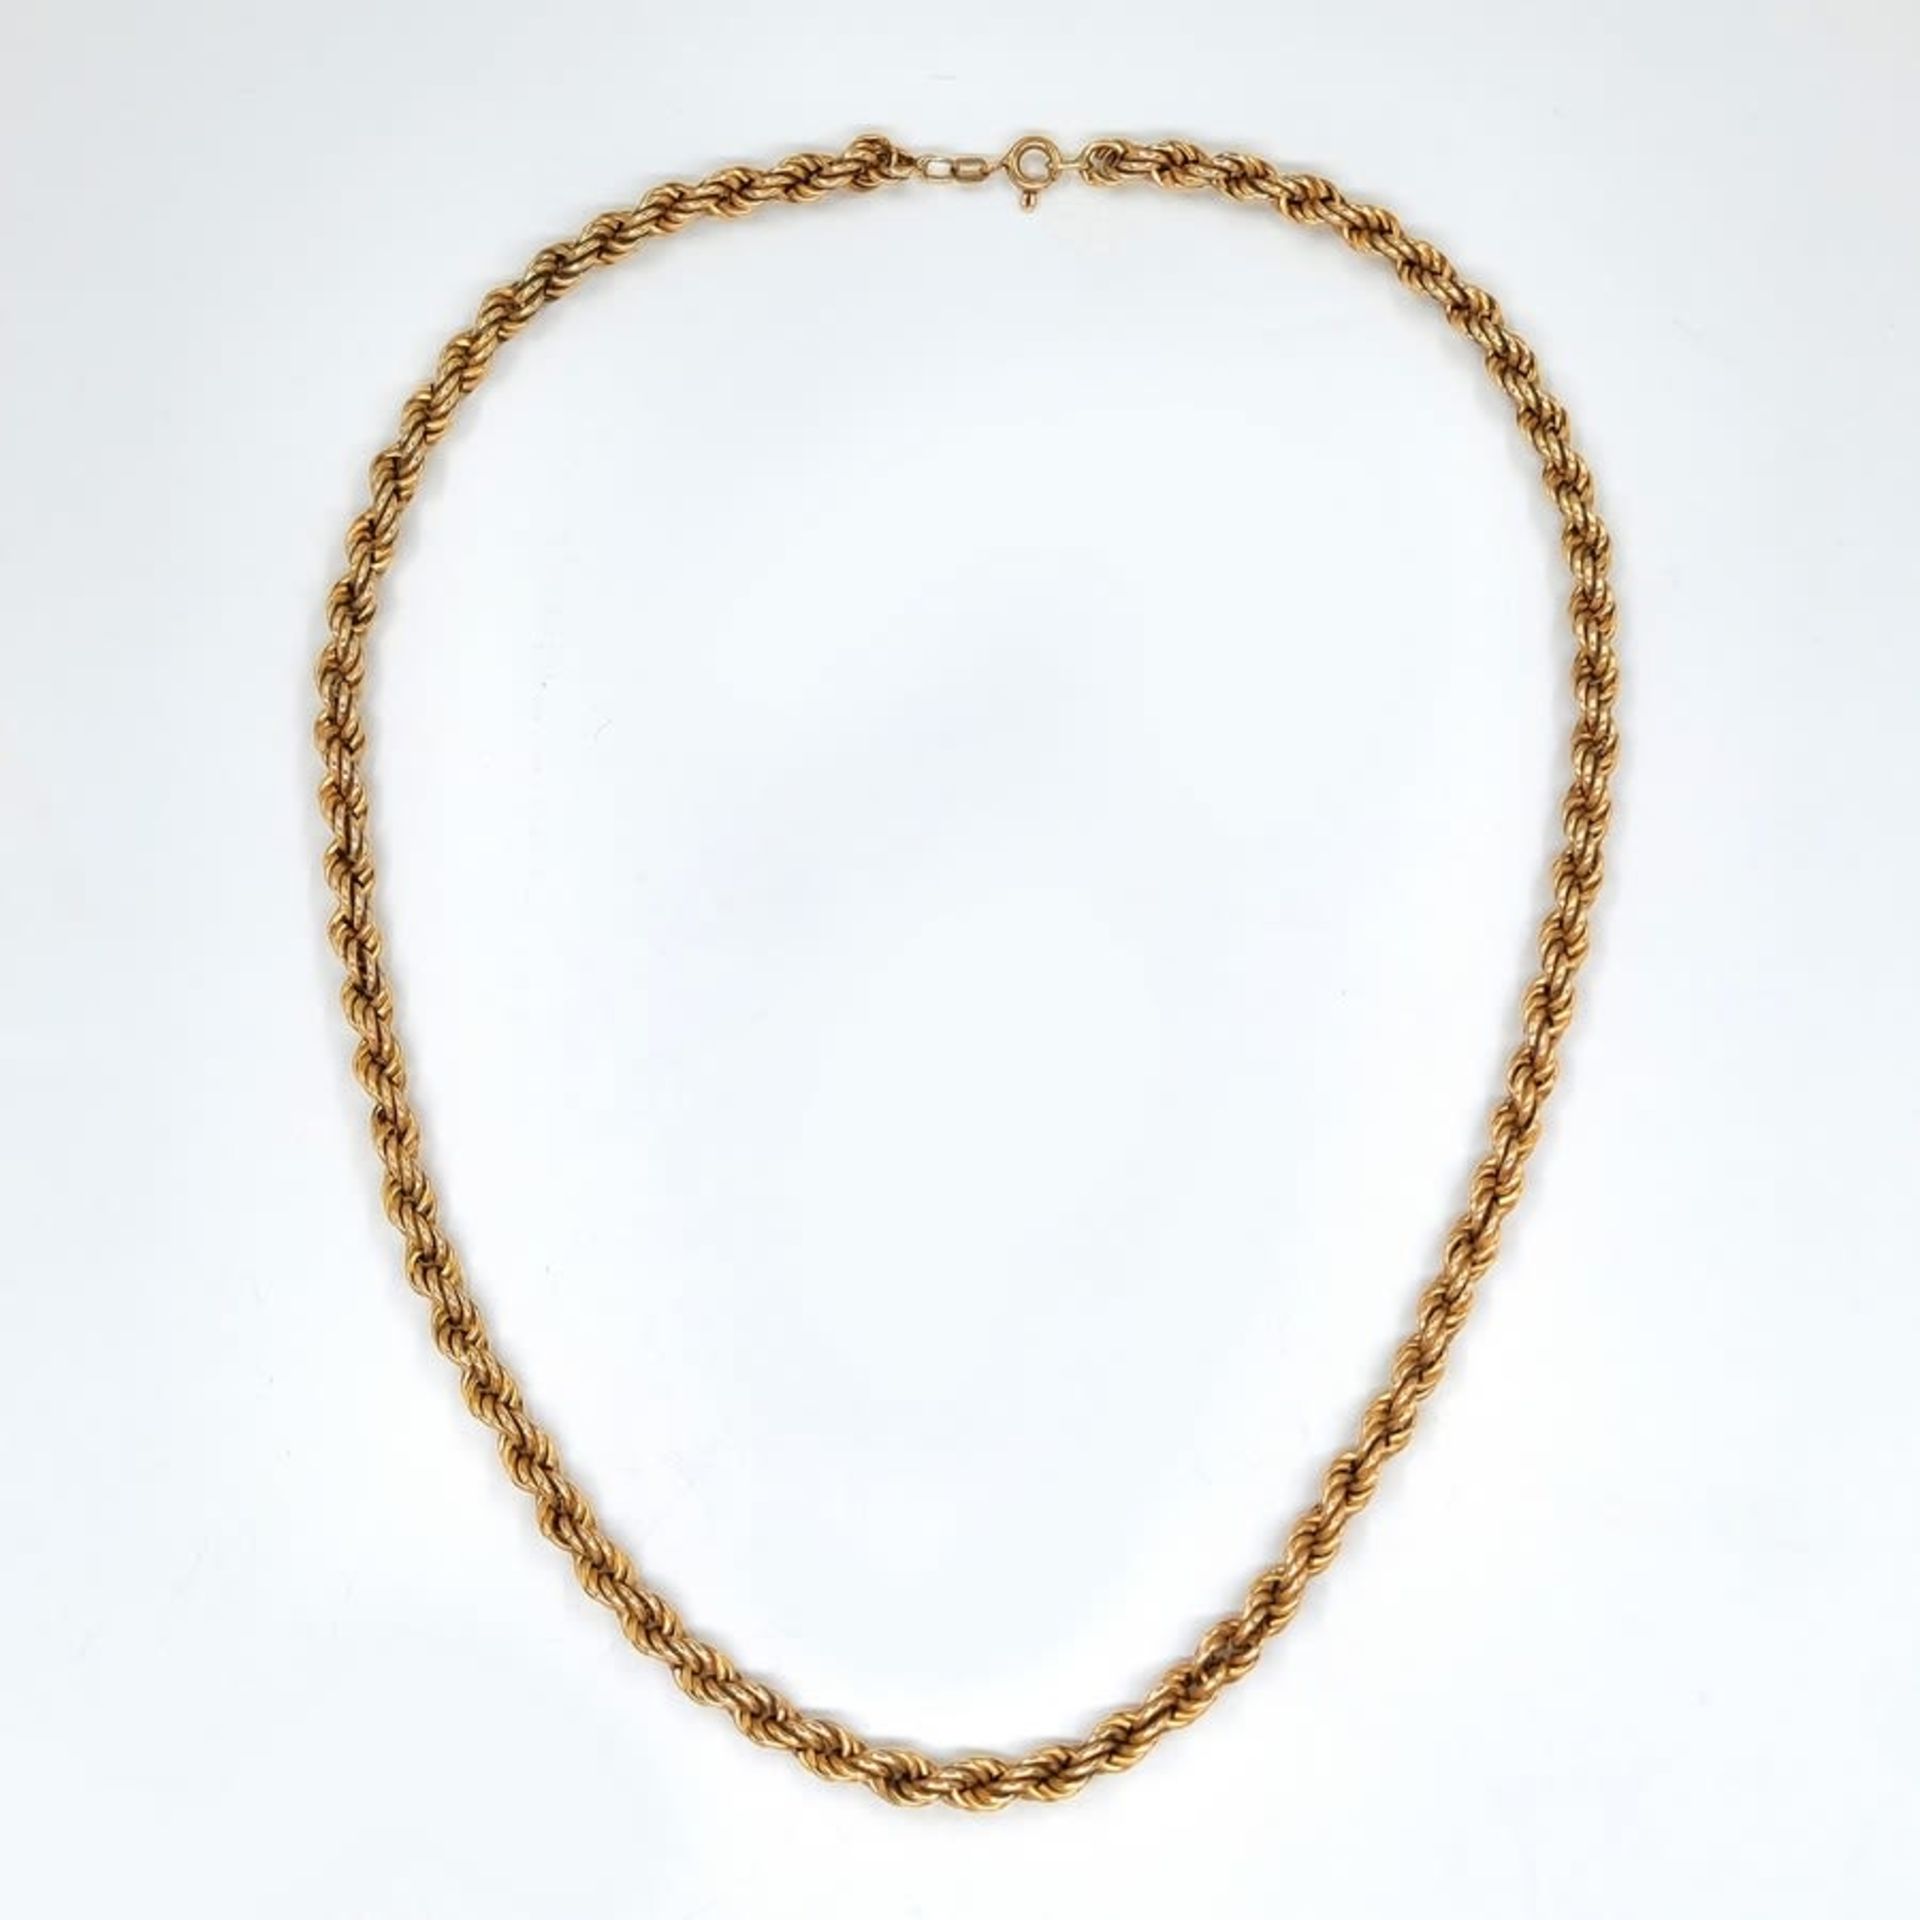 Necklace 14K yellow gold, signed, Length: 46 cm, Weight: 15.54 grams.